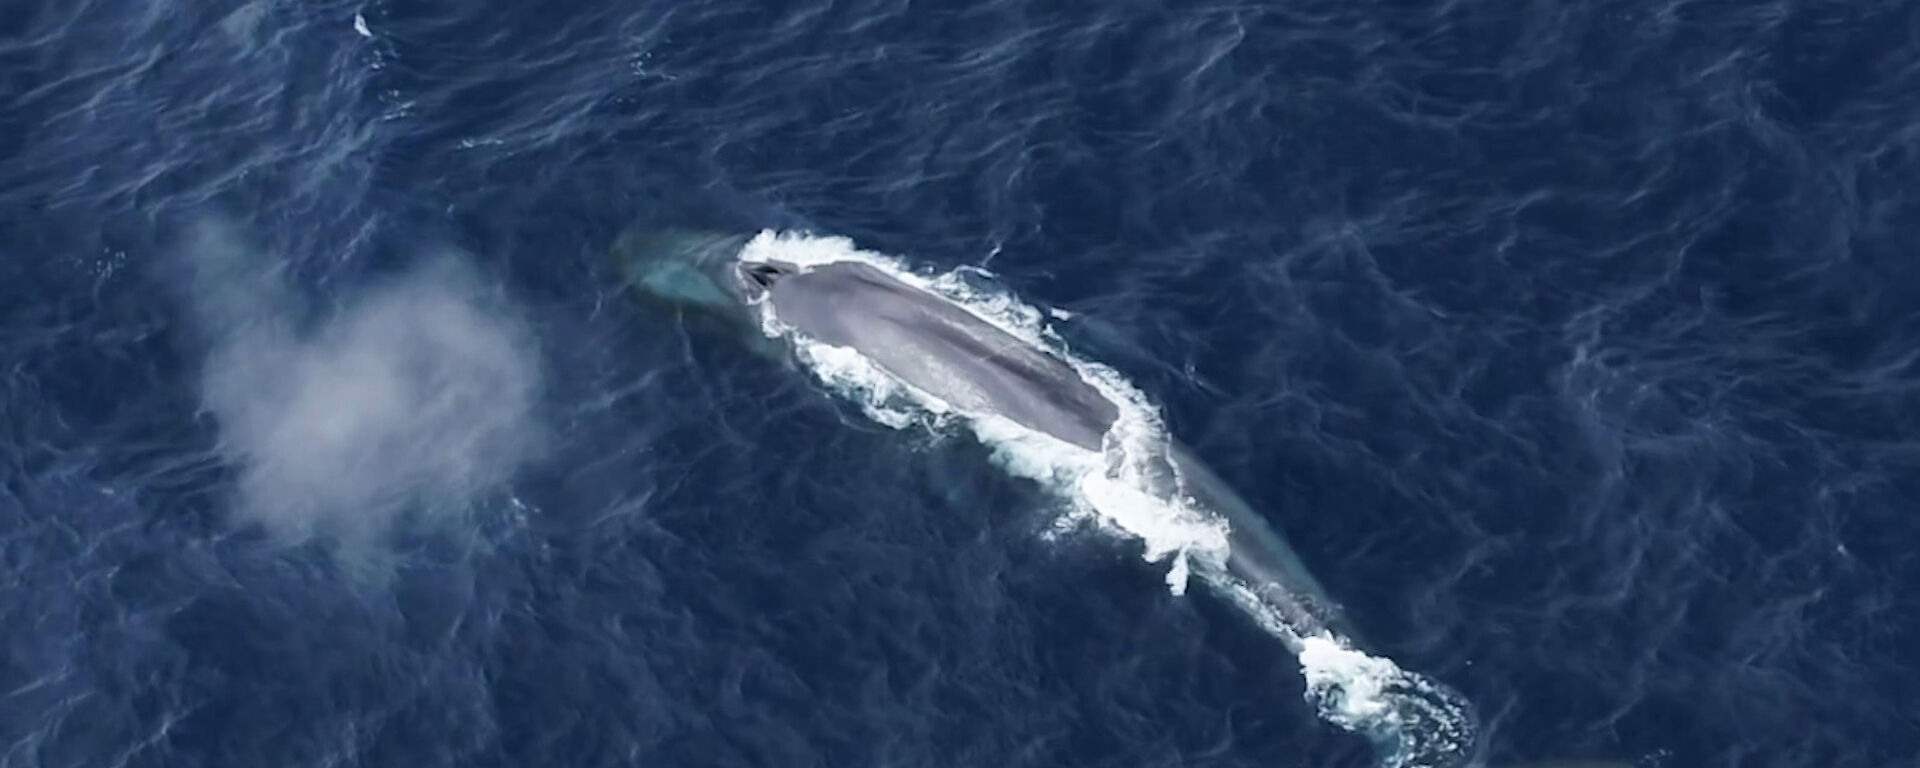 Aerial view of an Antarctic blue whale with a puff of aerated water rising like a cloud from its blow hole.